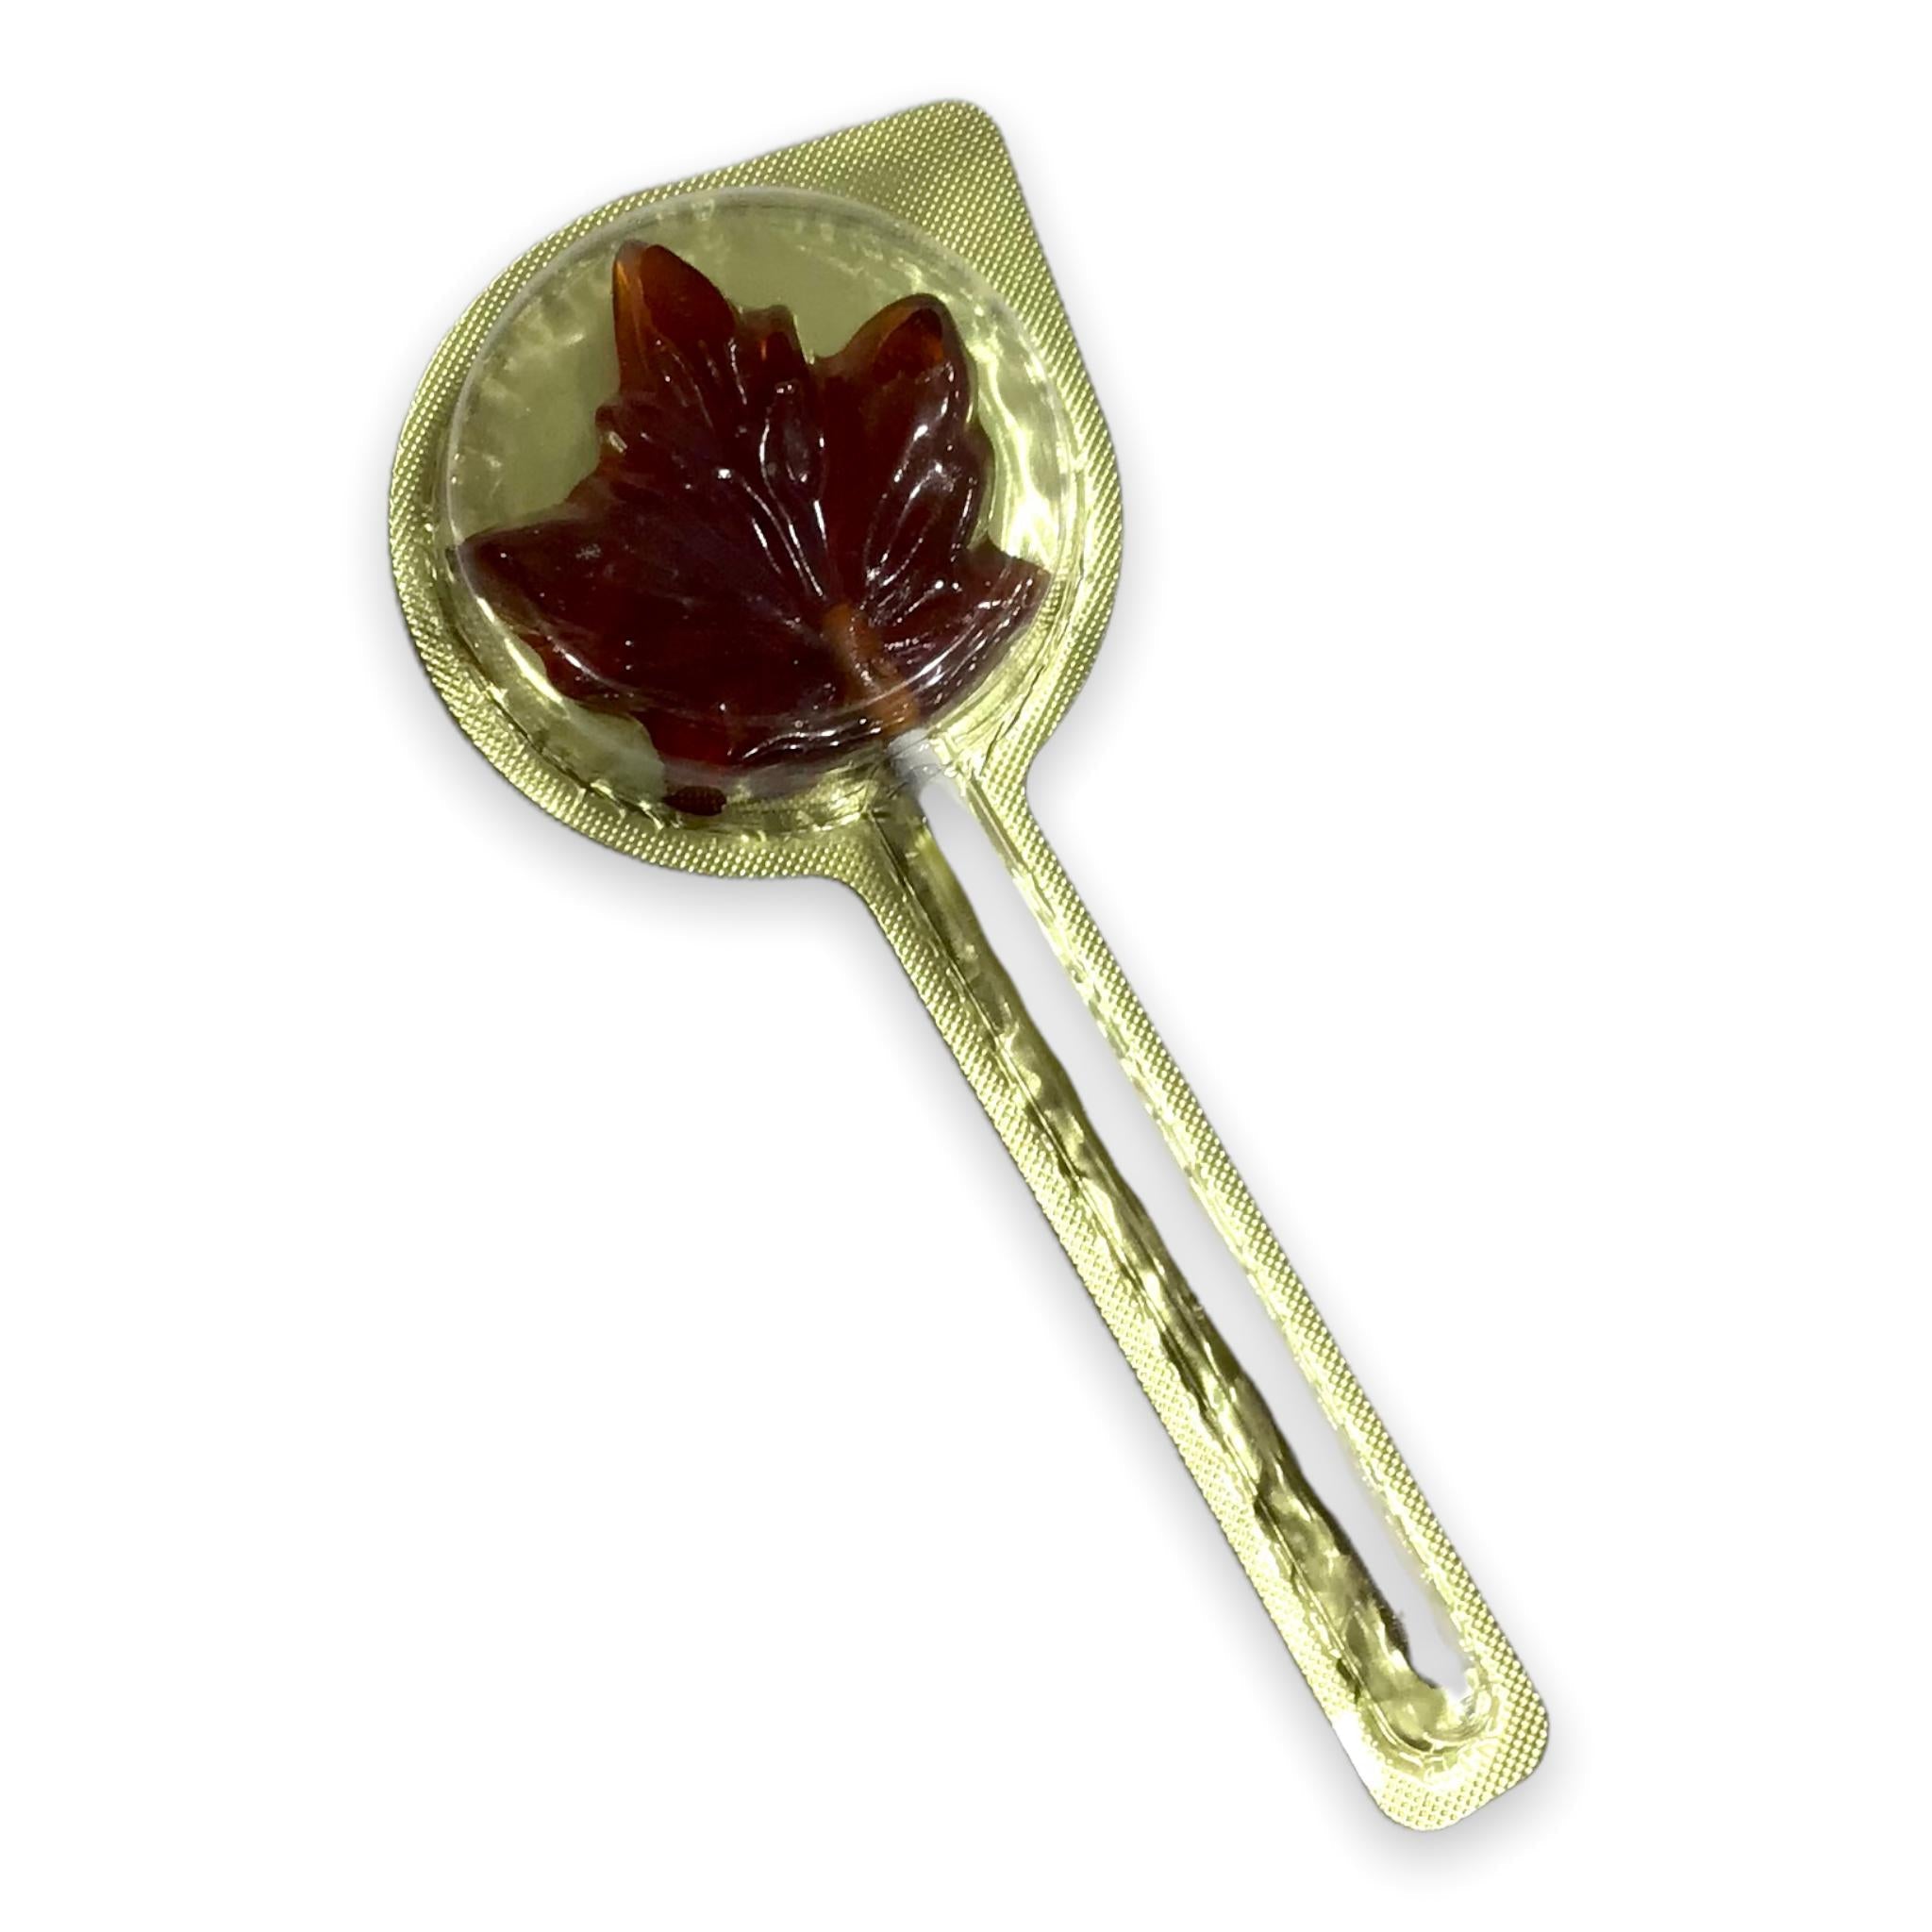 Canadian 100% Pure Maple Syrup Lollipop 20g